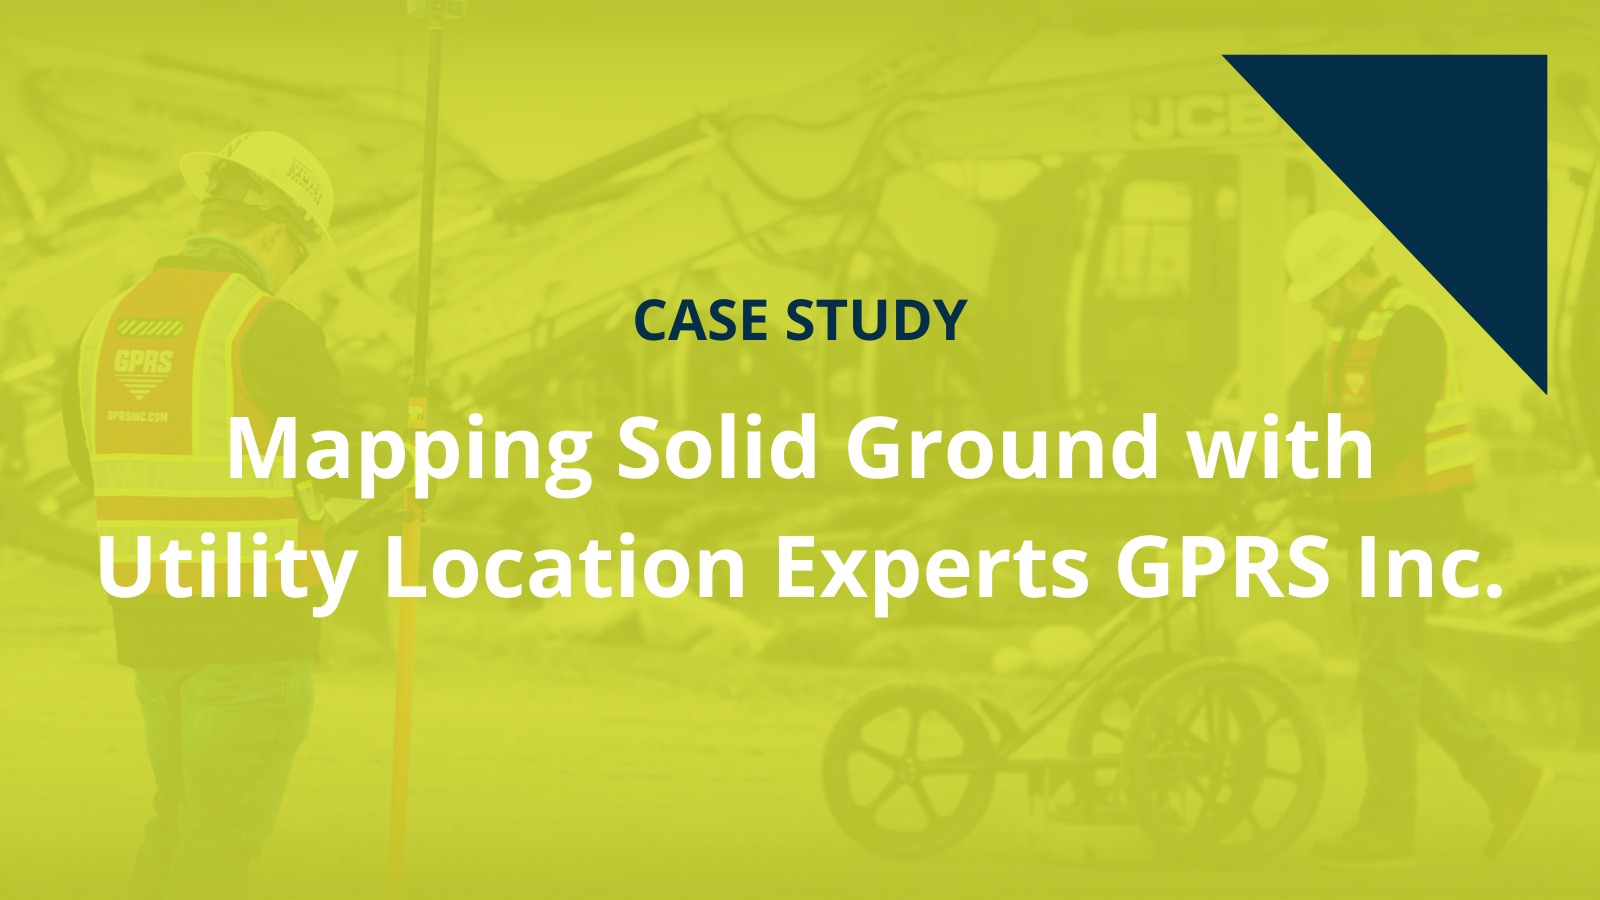 Mapping Solid Ground with Utility Location Experts GPRS Inc.